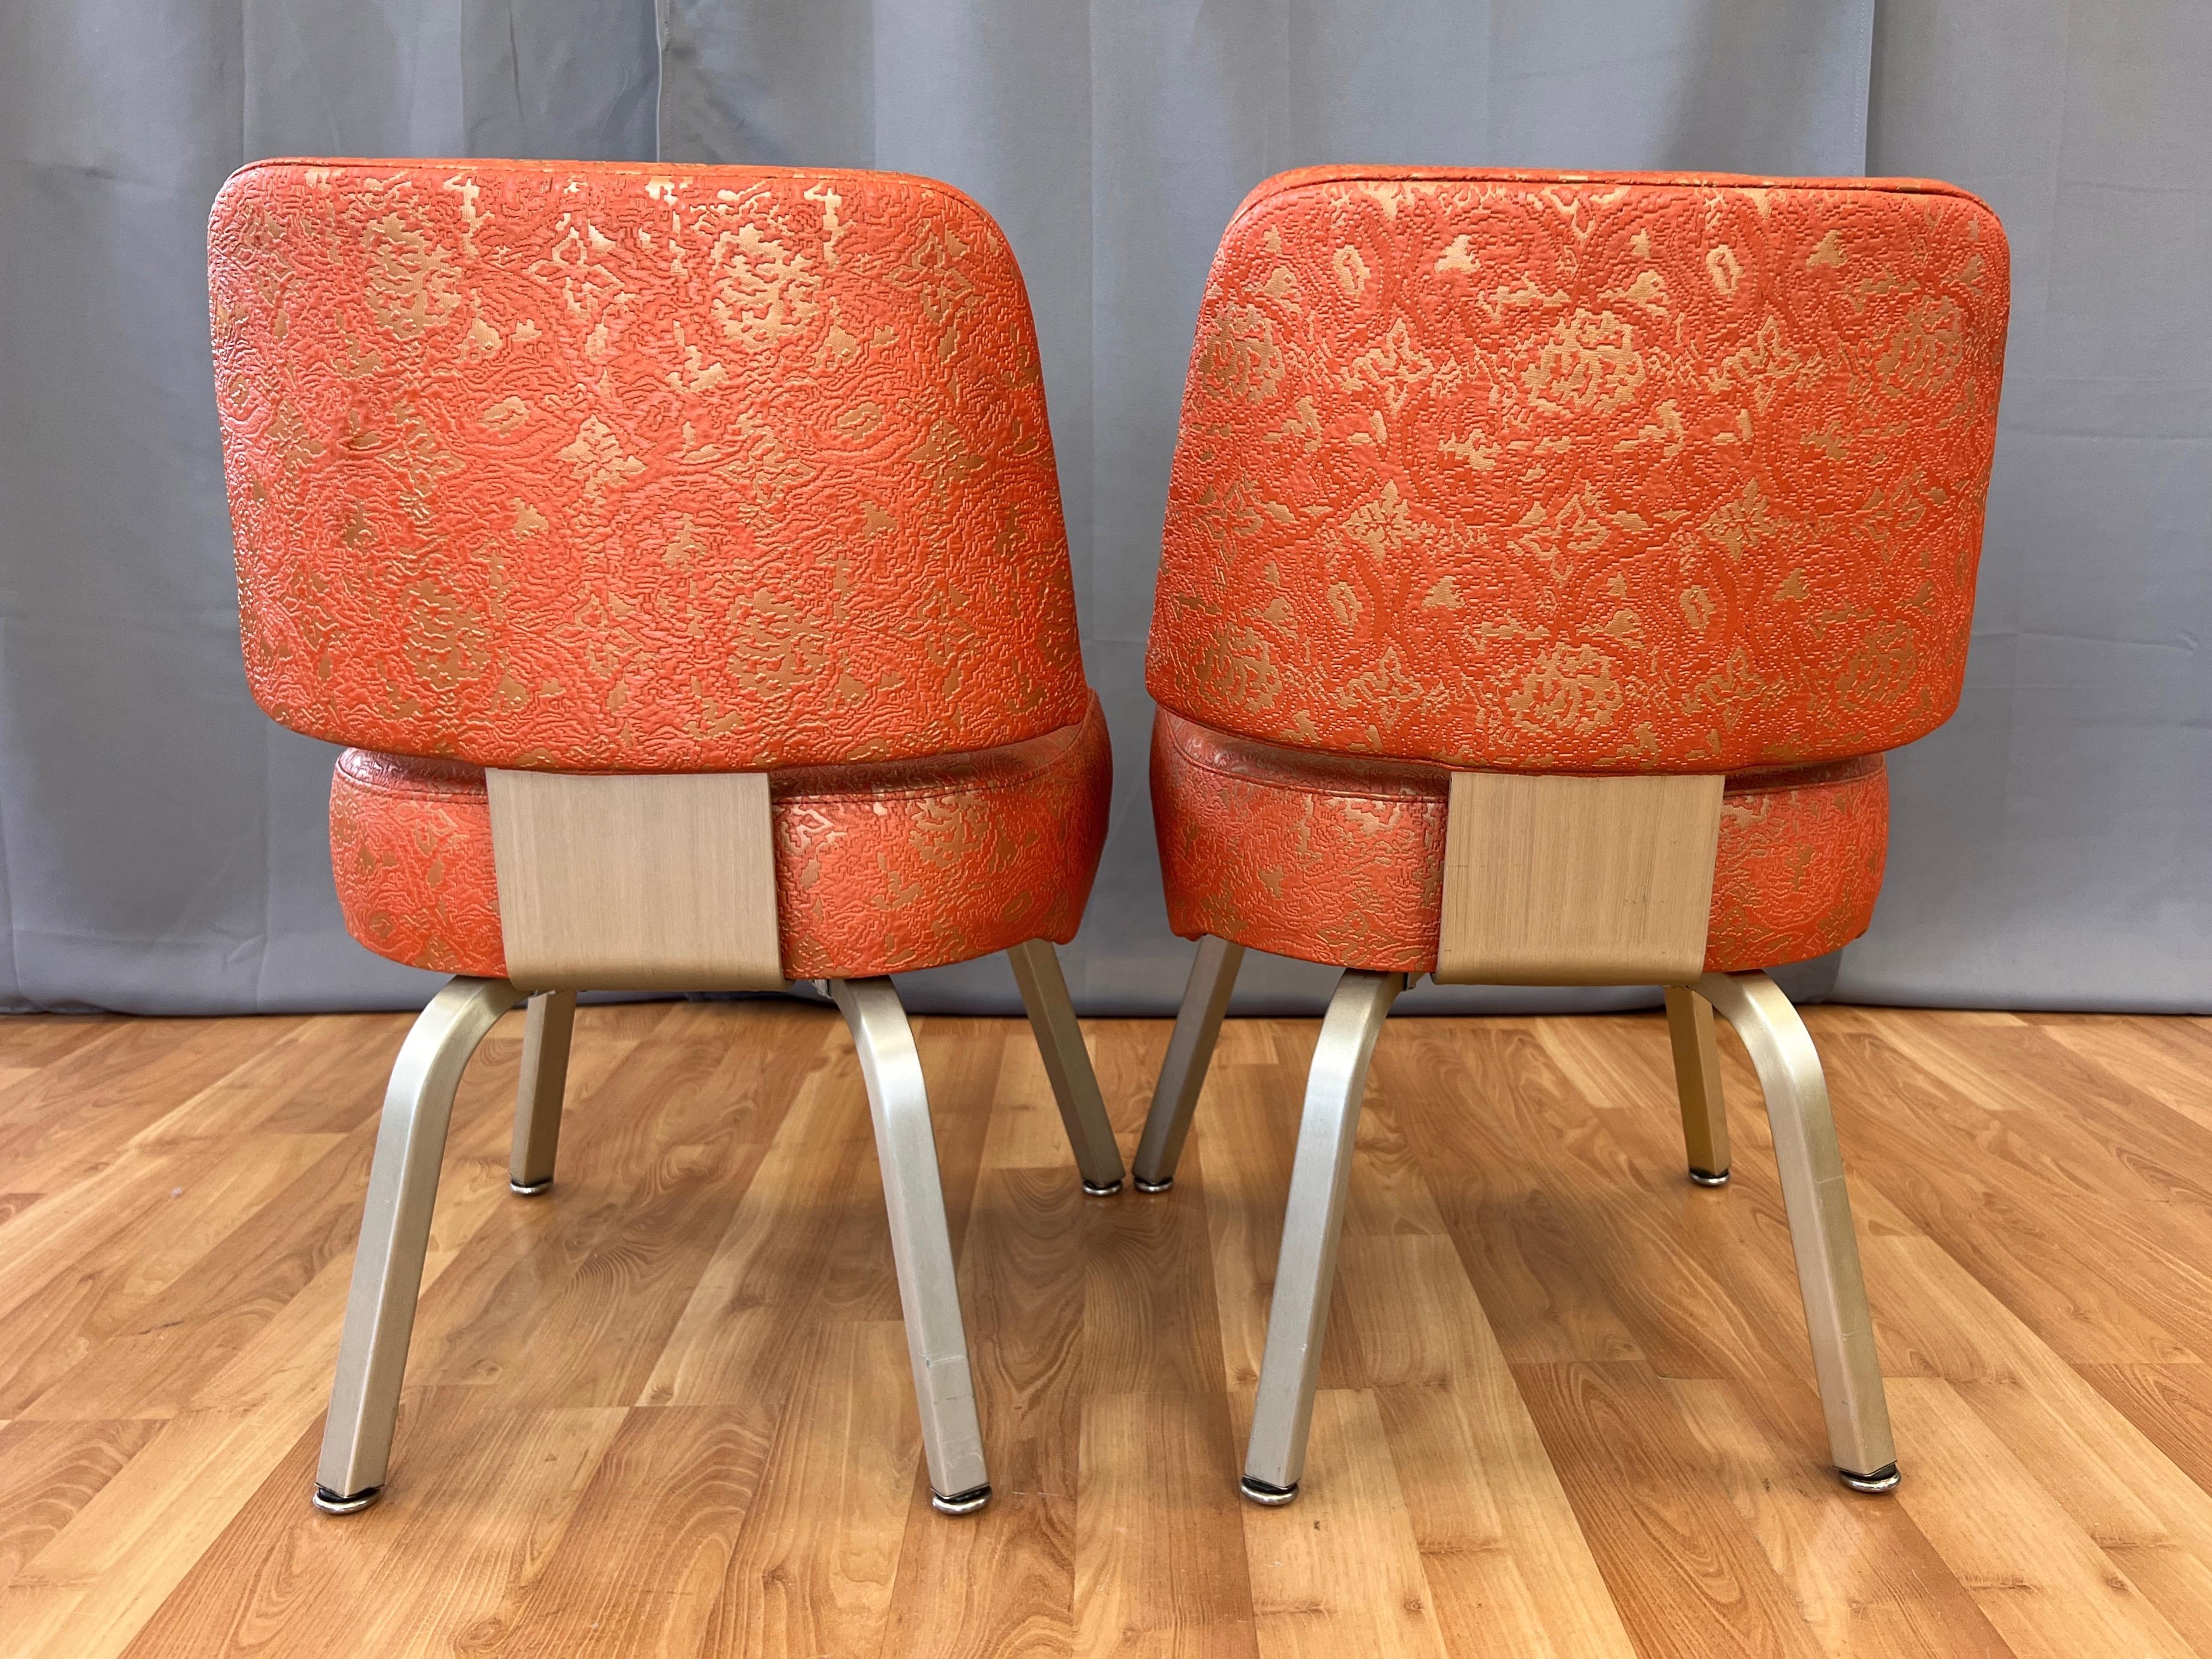 Brushed Pair of Gasser “California Cocktail Lounge” Vinyl & Aluminum Side Chairs, 1960 